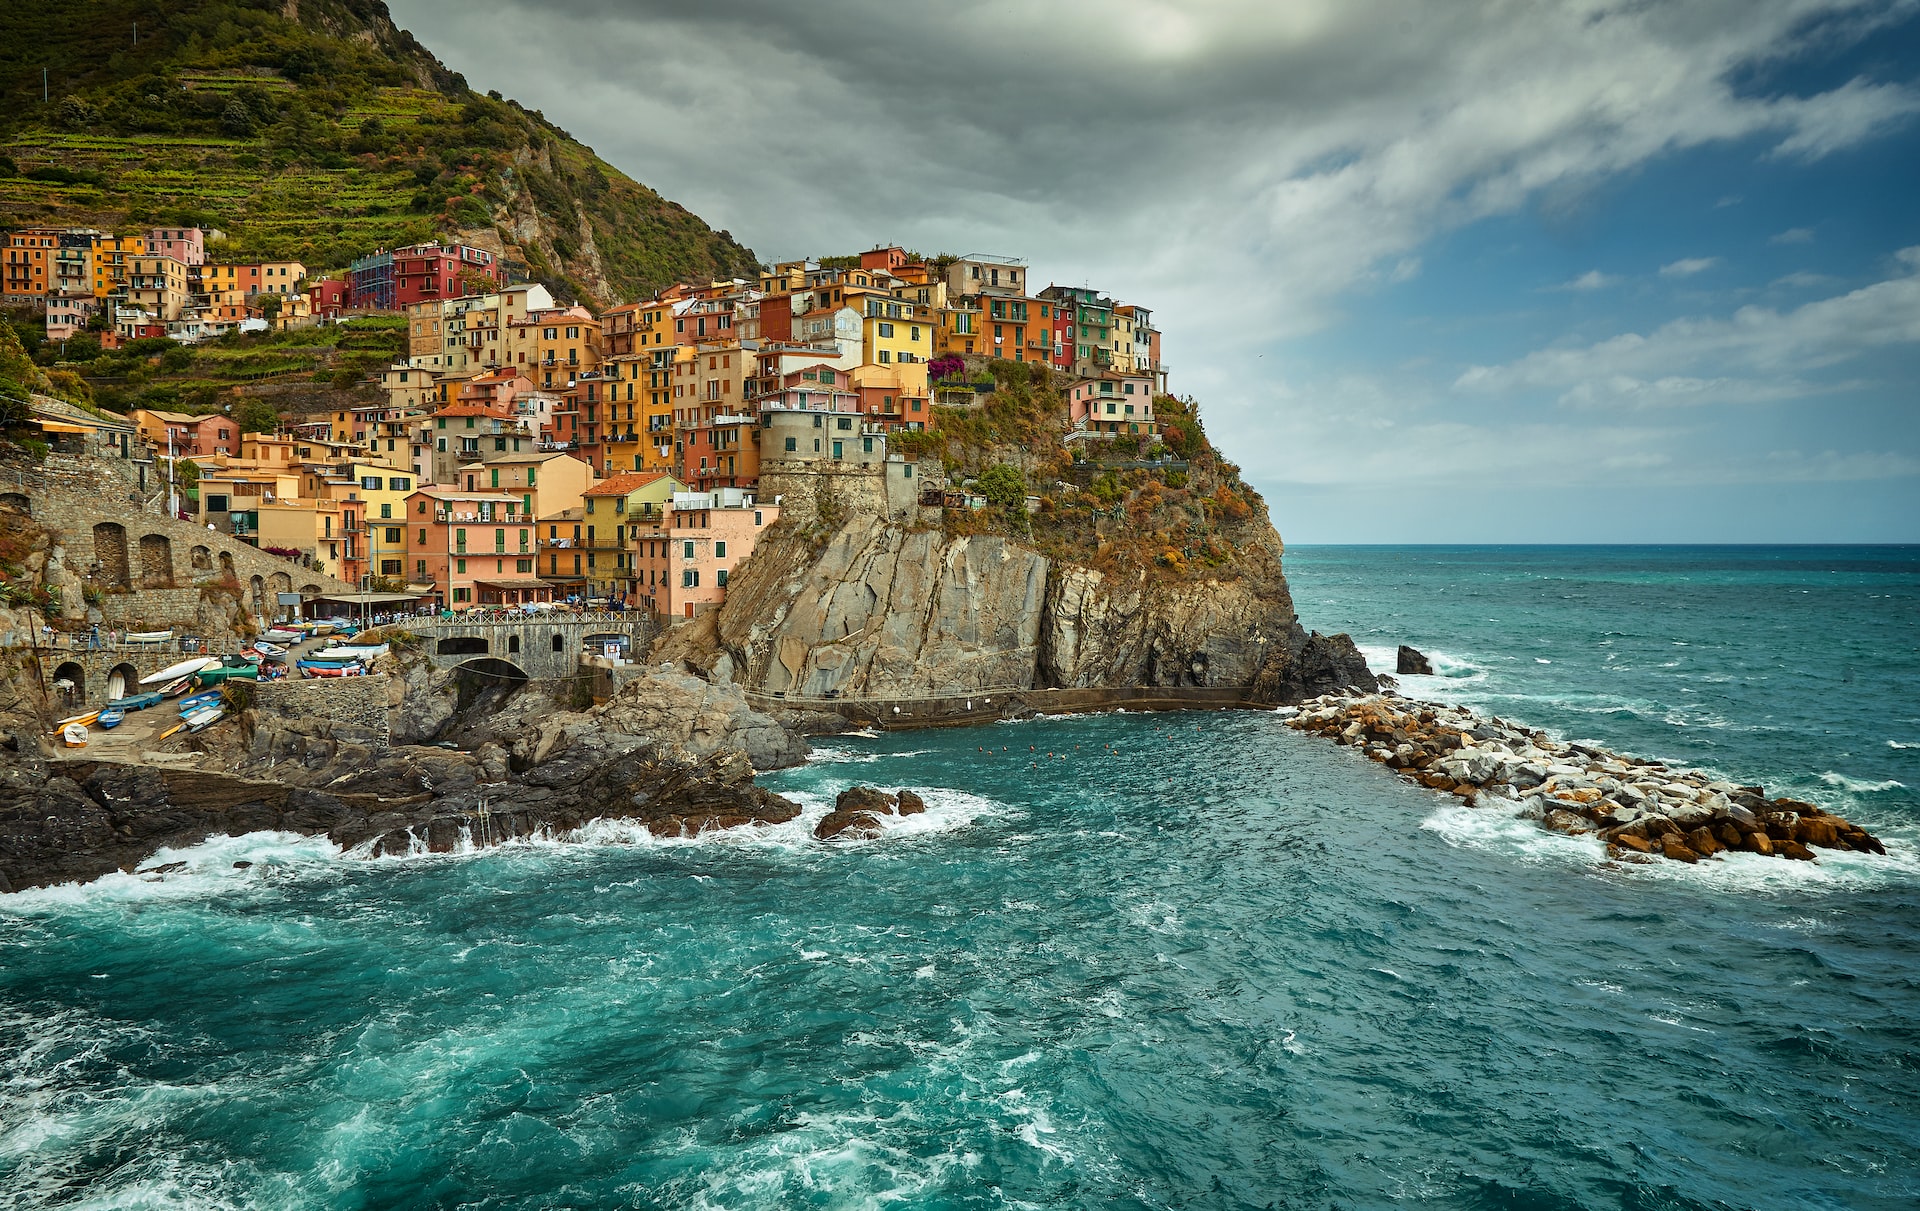 The dramatic seaside cliffs and colorful homes of Manarola, Cinqueterre.